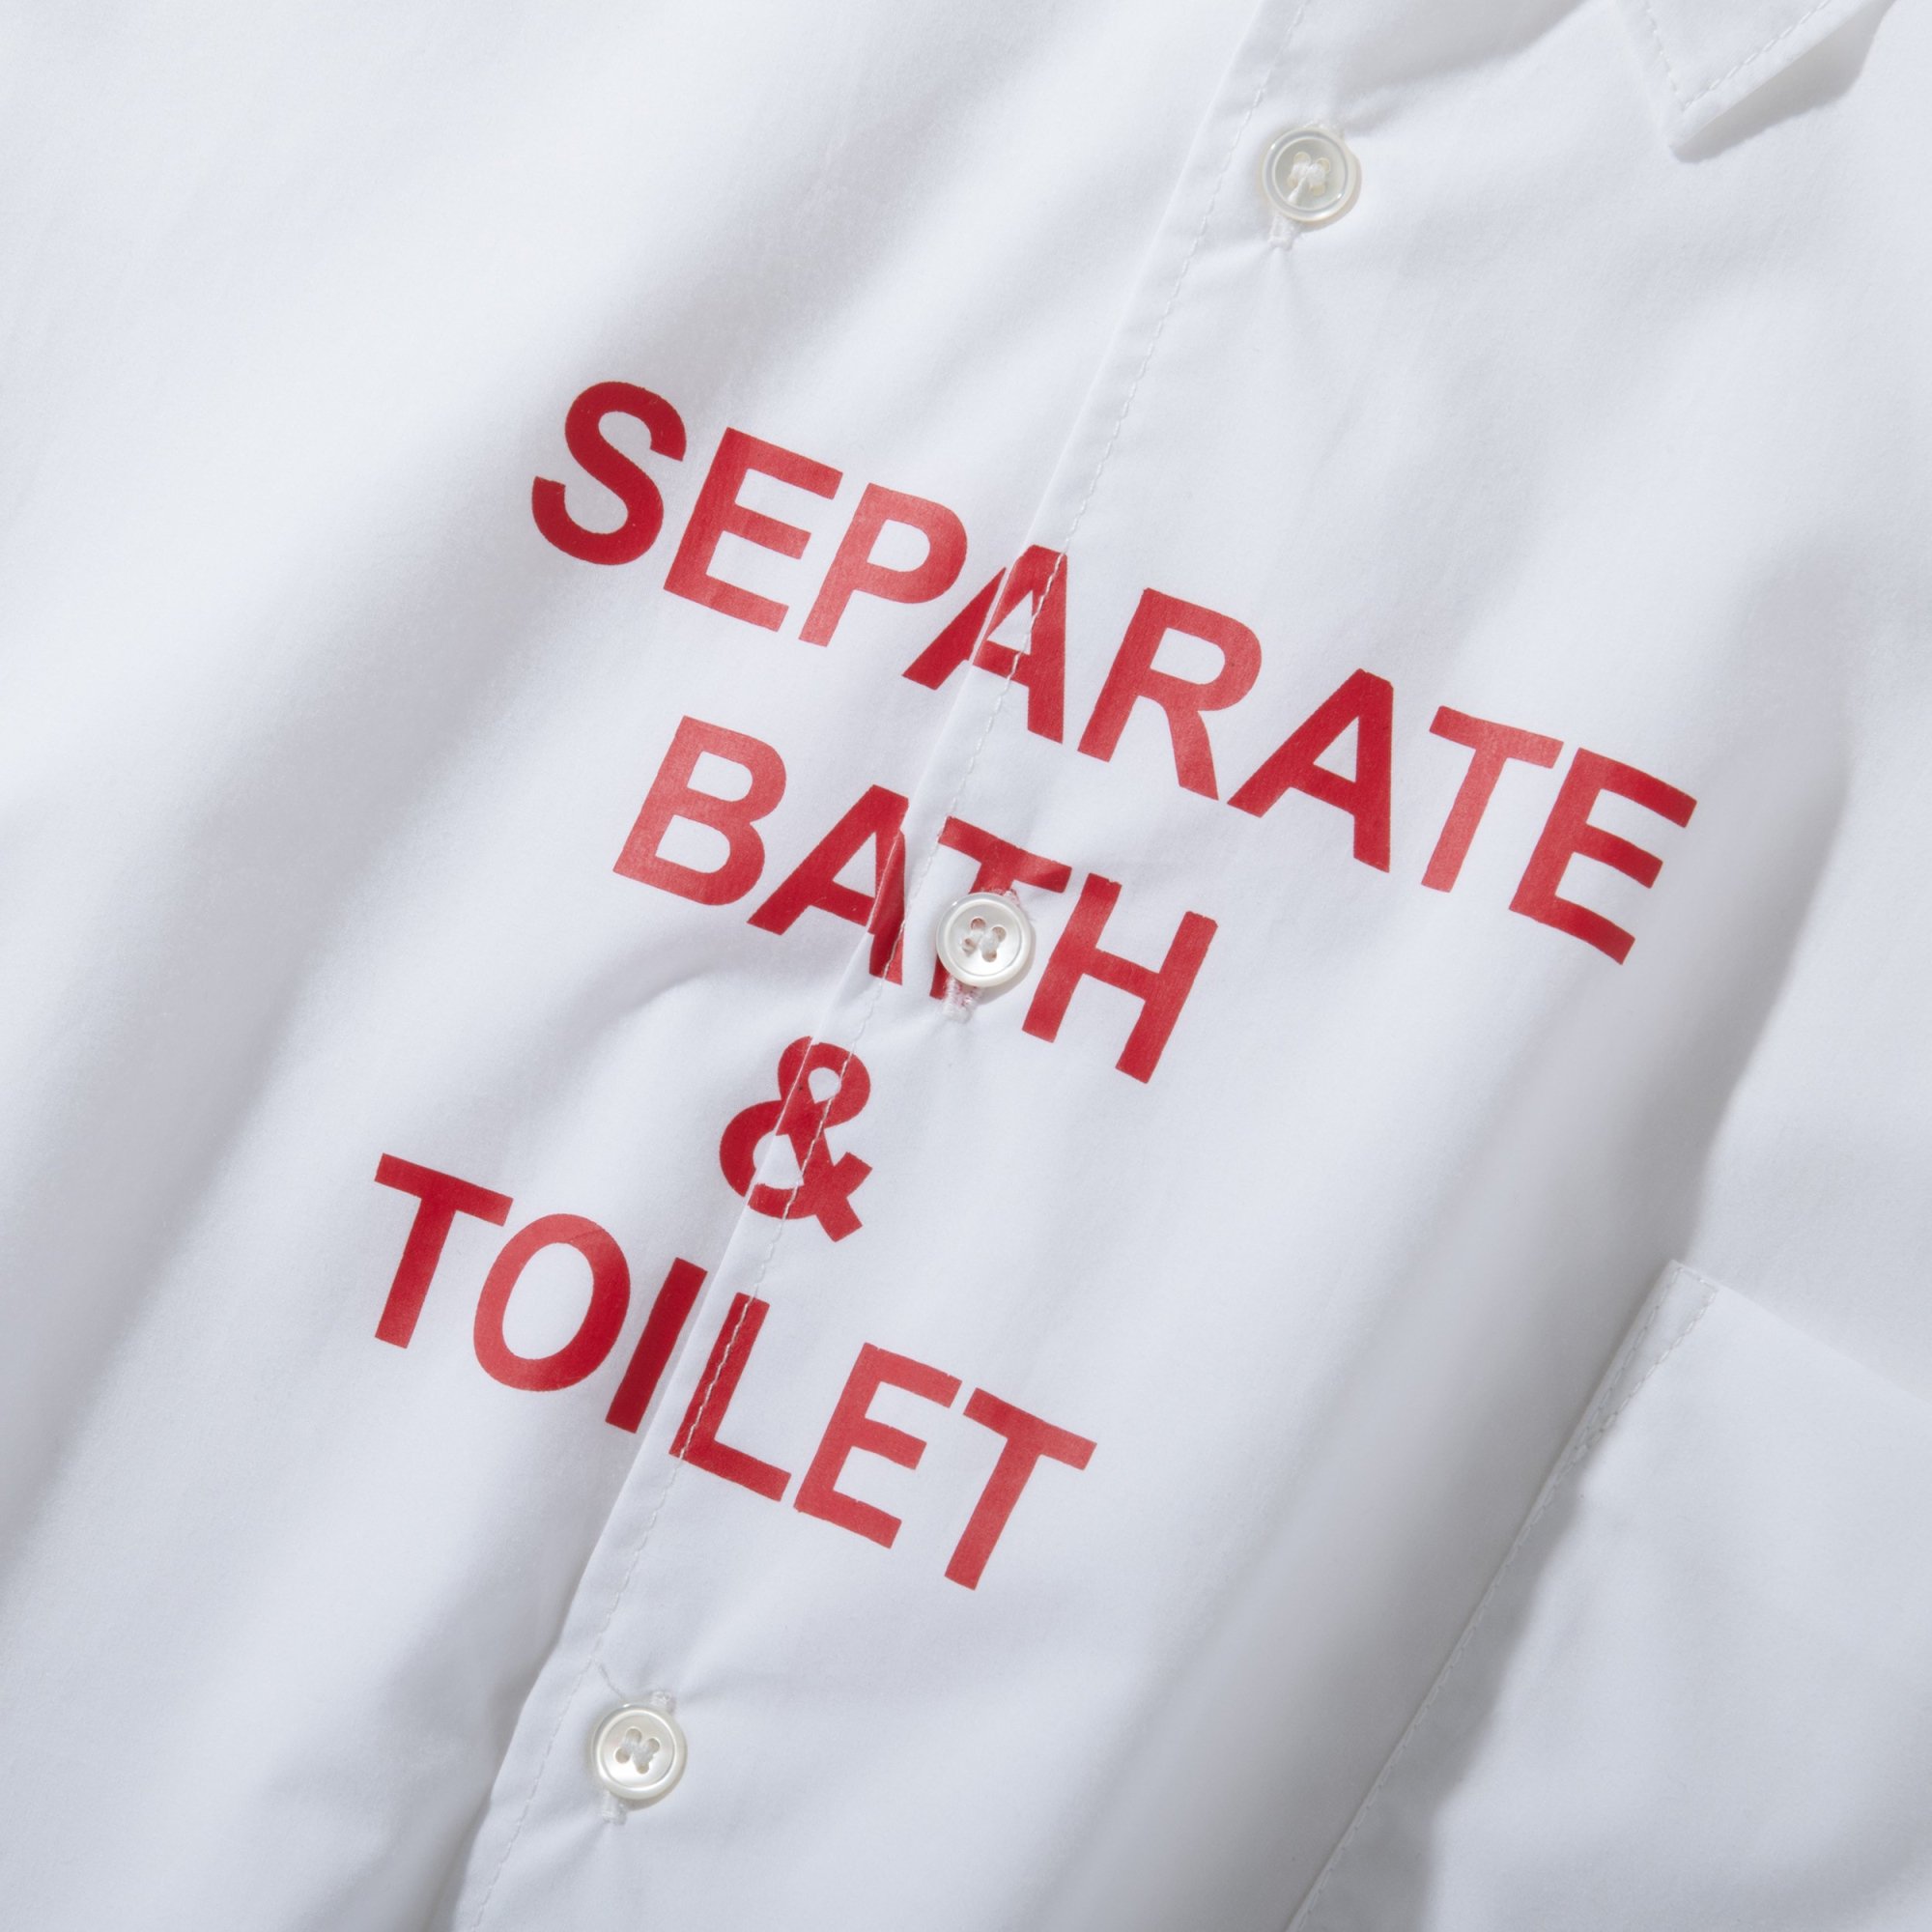 SEPARATE BATH & TOILET<br />SEPASHIRTS AKA / WHITE<img class='new_mark_img2' src='https://img.shop-pro.jp/img/new/icons47.gif' style='border:none;display:inline;margin:0px;padding:0px;width:auto;' />